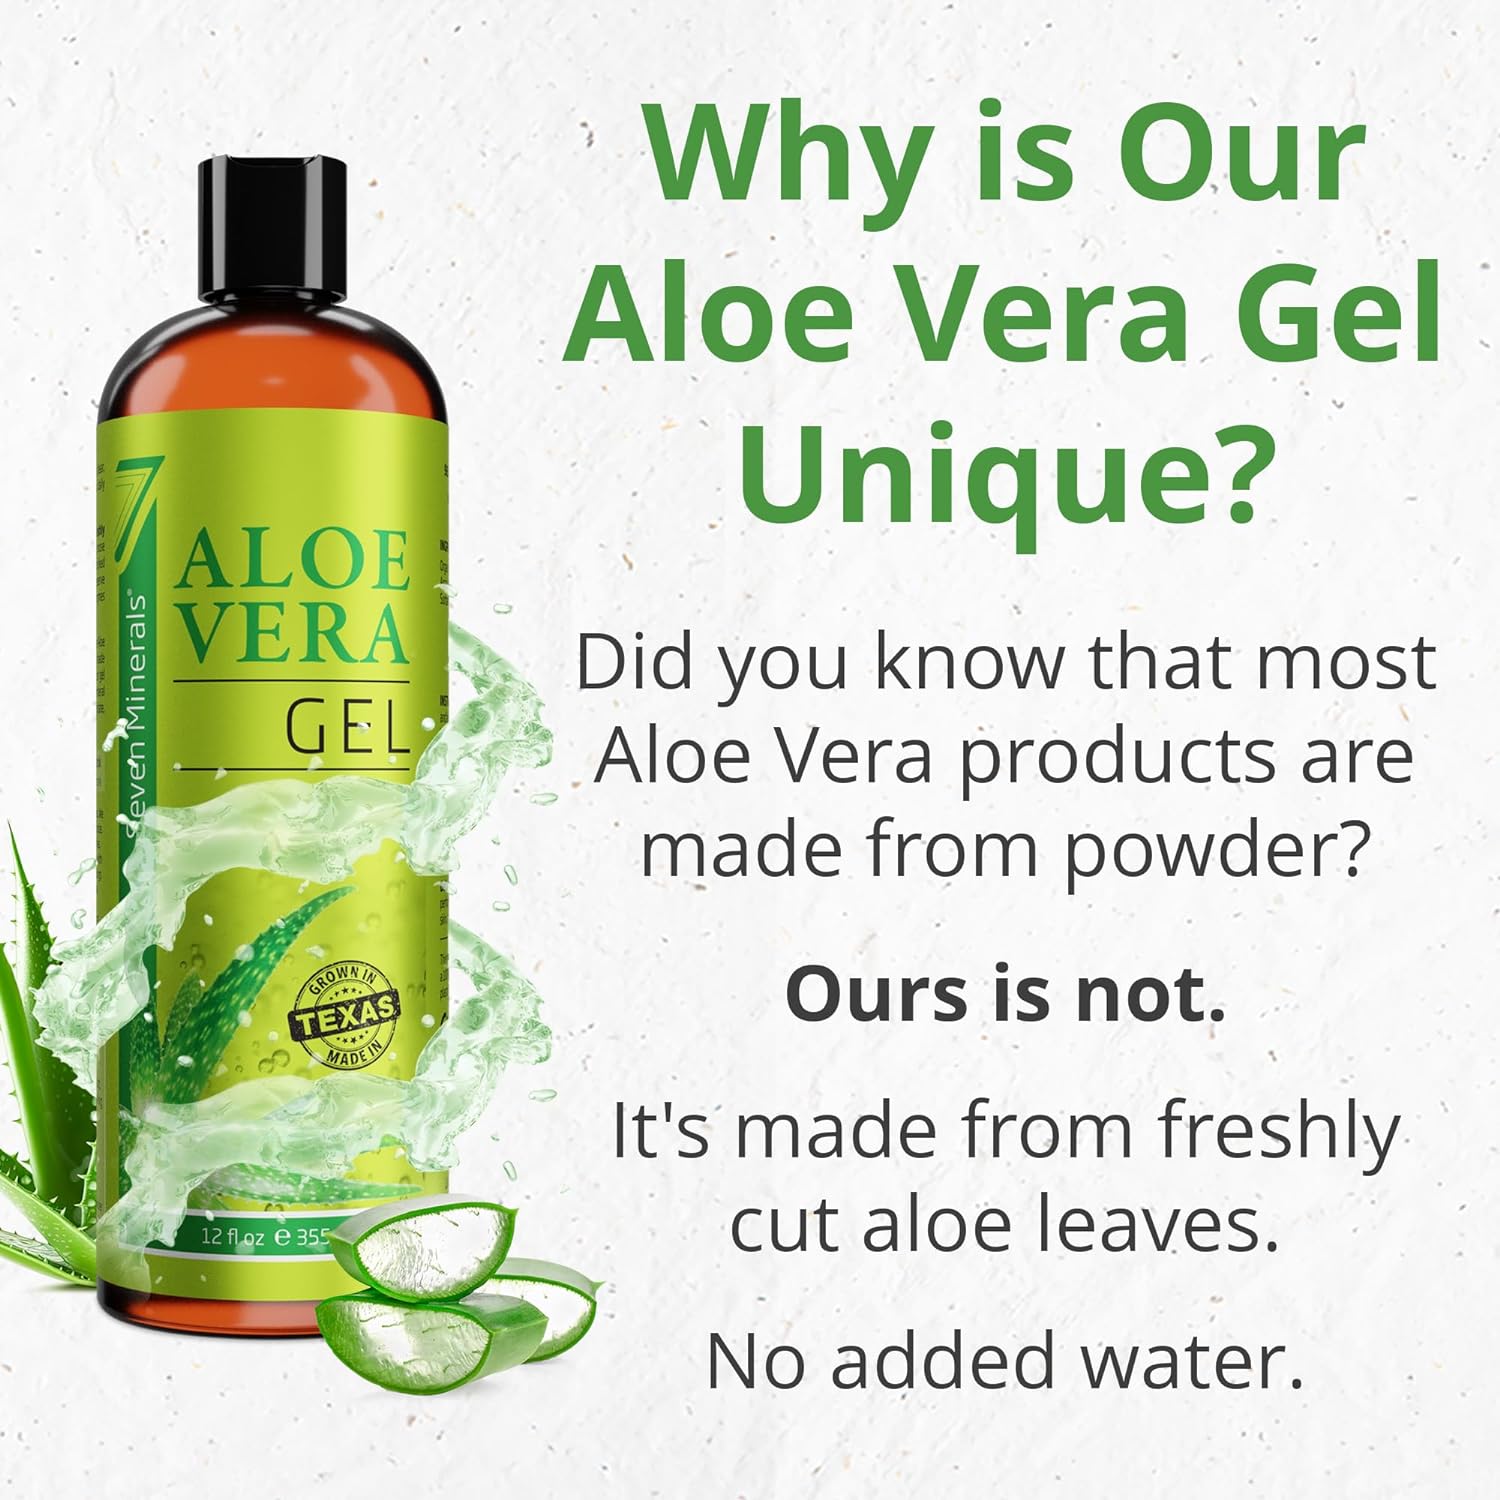 Seven Minerals Organic Aloe Vera Gel with 100% Pure Aloe From Freshly Cut Aloe Plant, Not Powder - No Xanthan, So It Absorbs Rapidly with No Sticky Residue - Big 12 fl oz - image 2 of 5